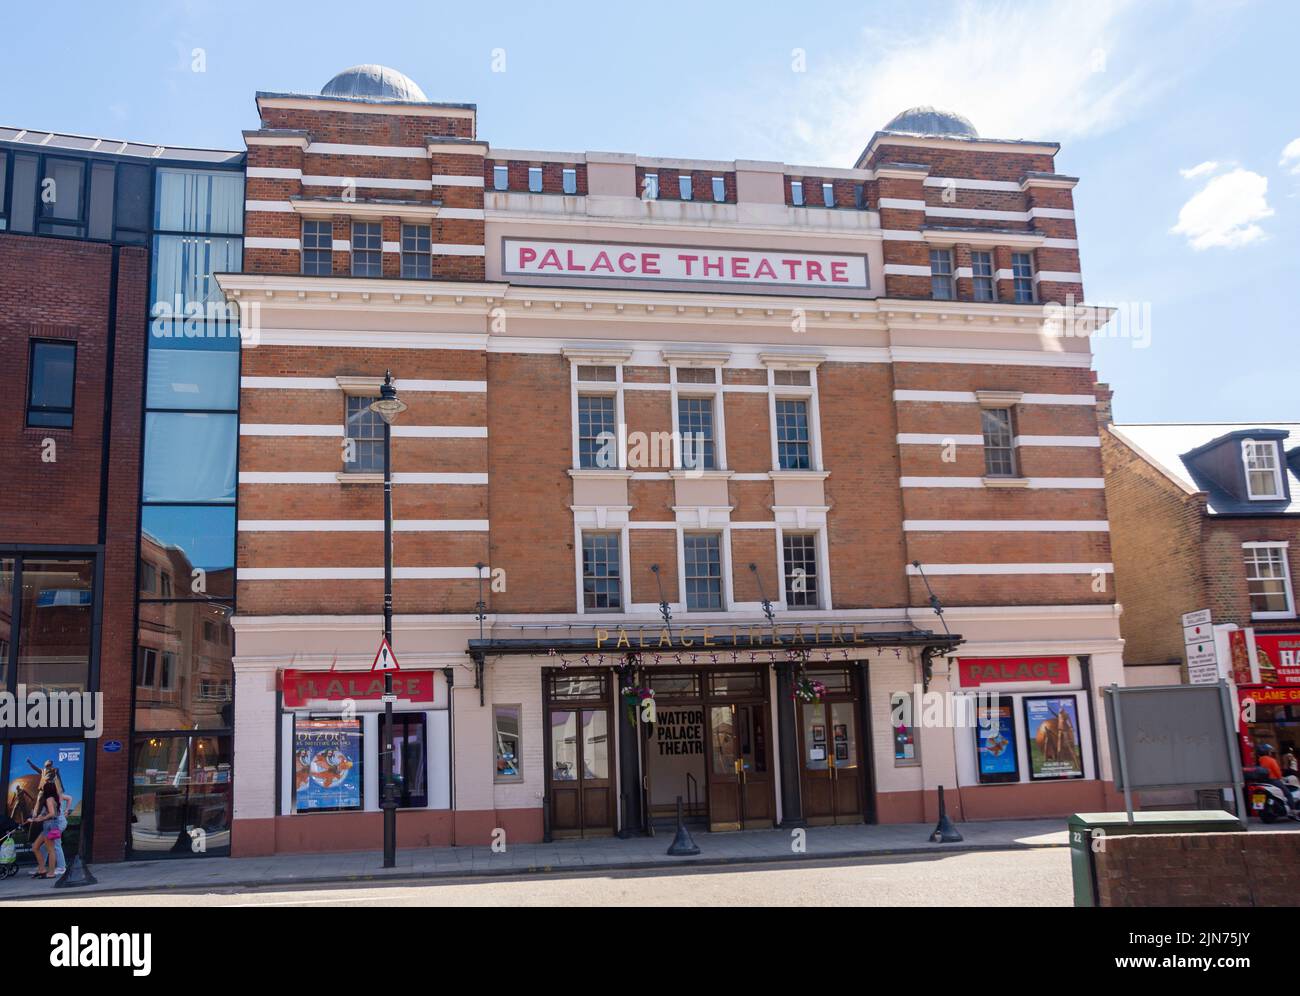 Watford Palace Theatre, Clarendon Road, Watford, Hertfordshire, Angleterre, Royaume-Uni Banque D'Images